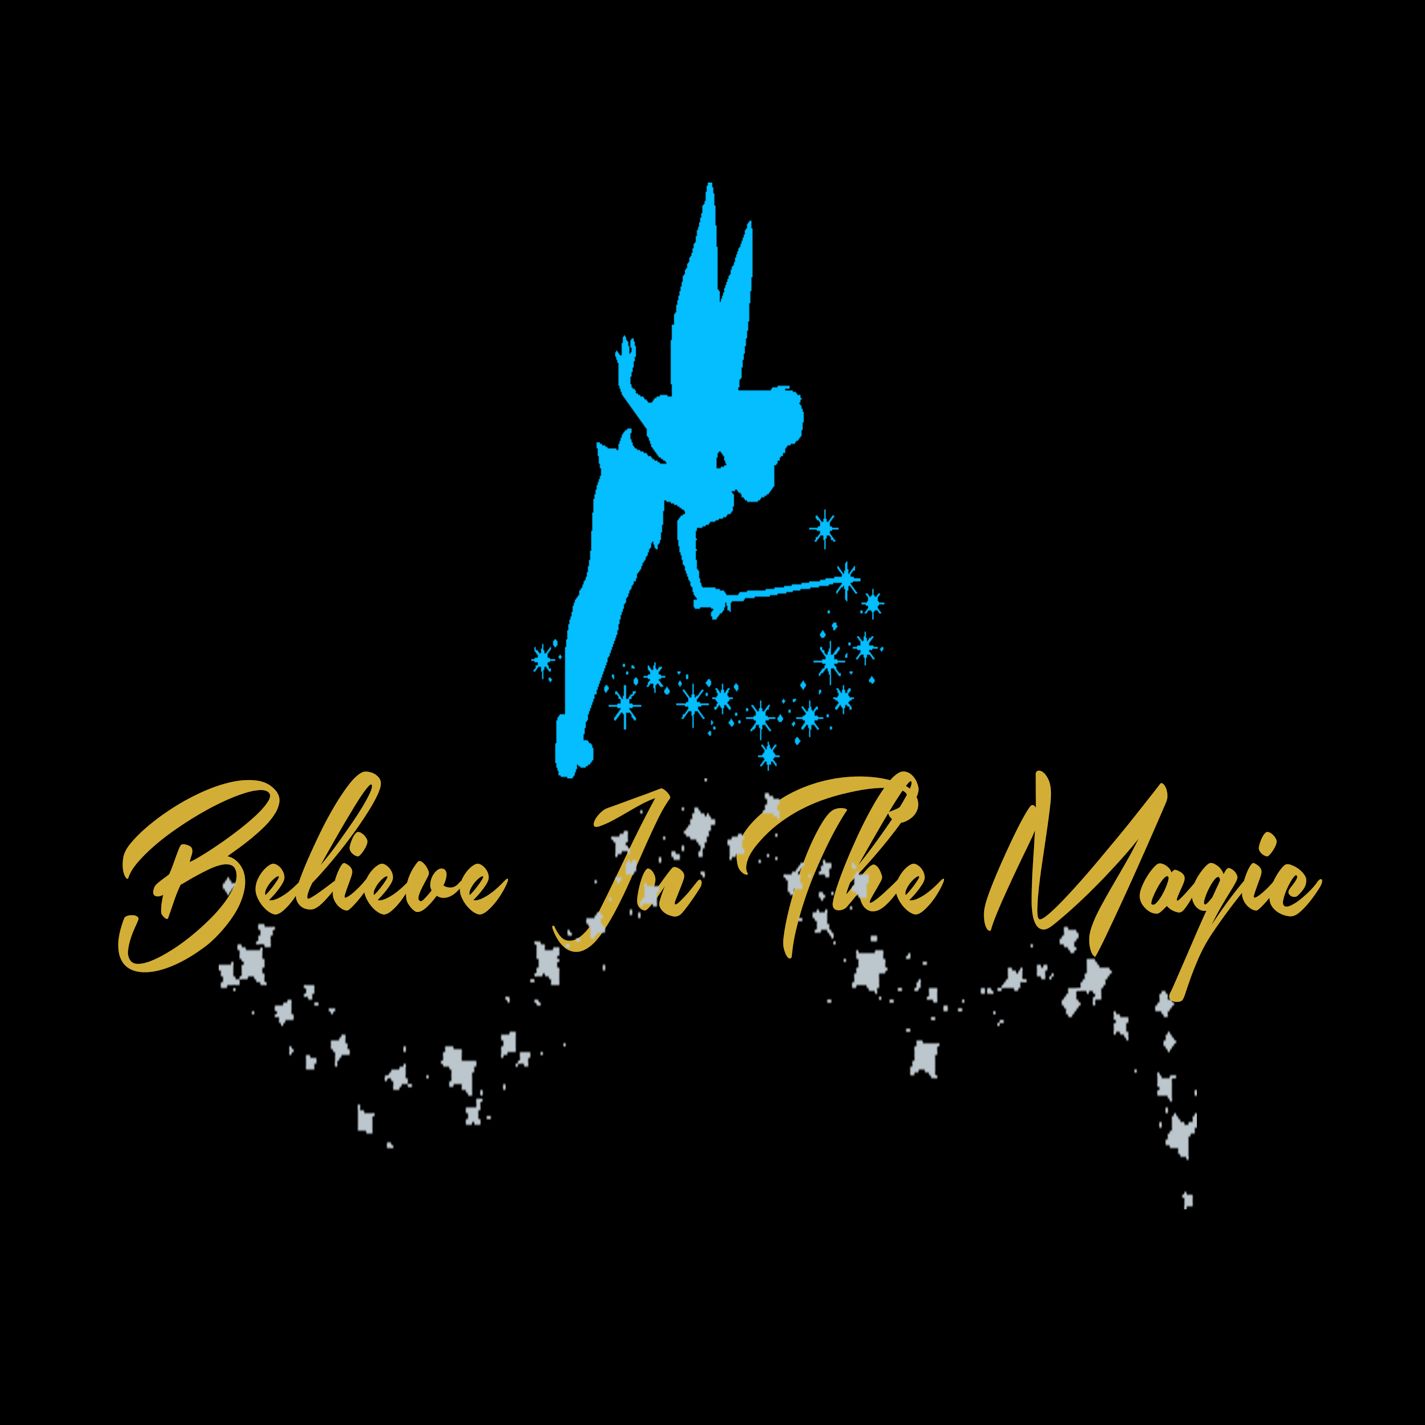 Believe In the magic Podcast